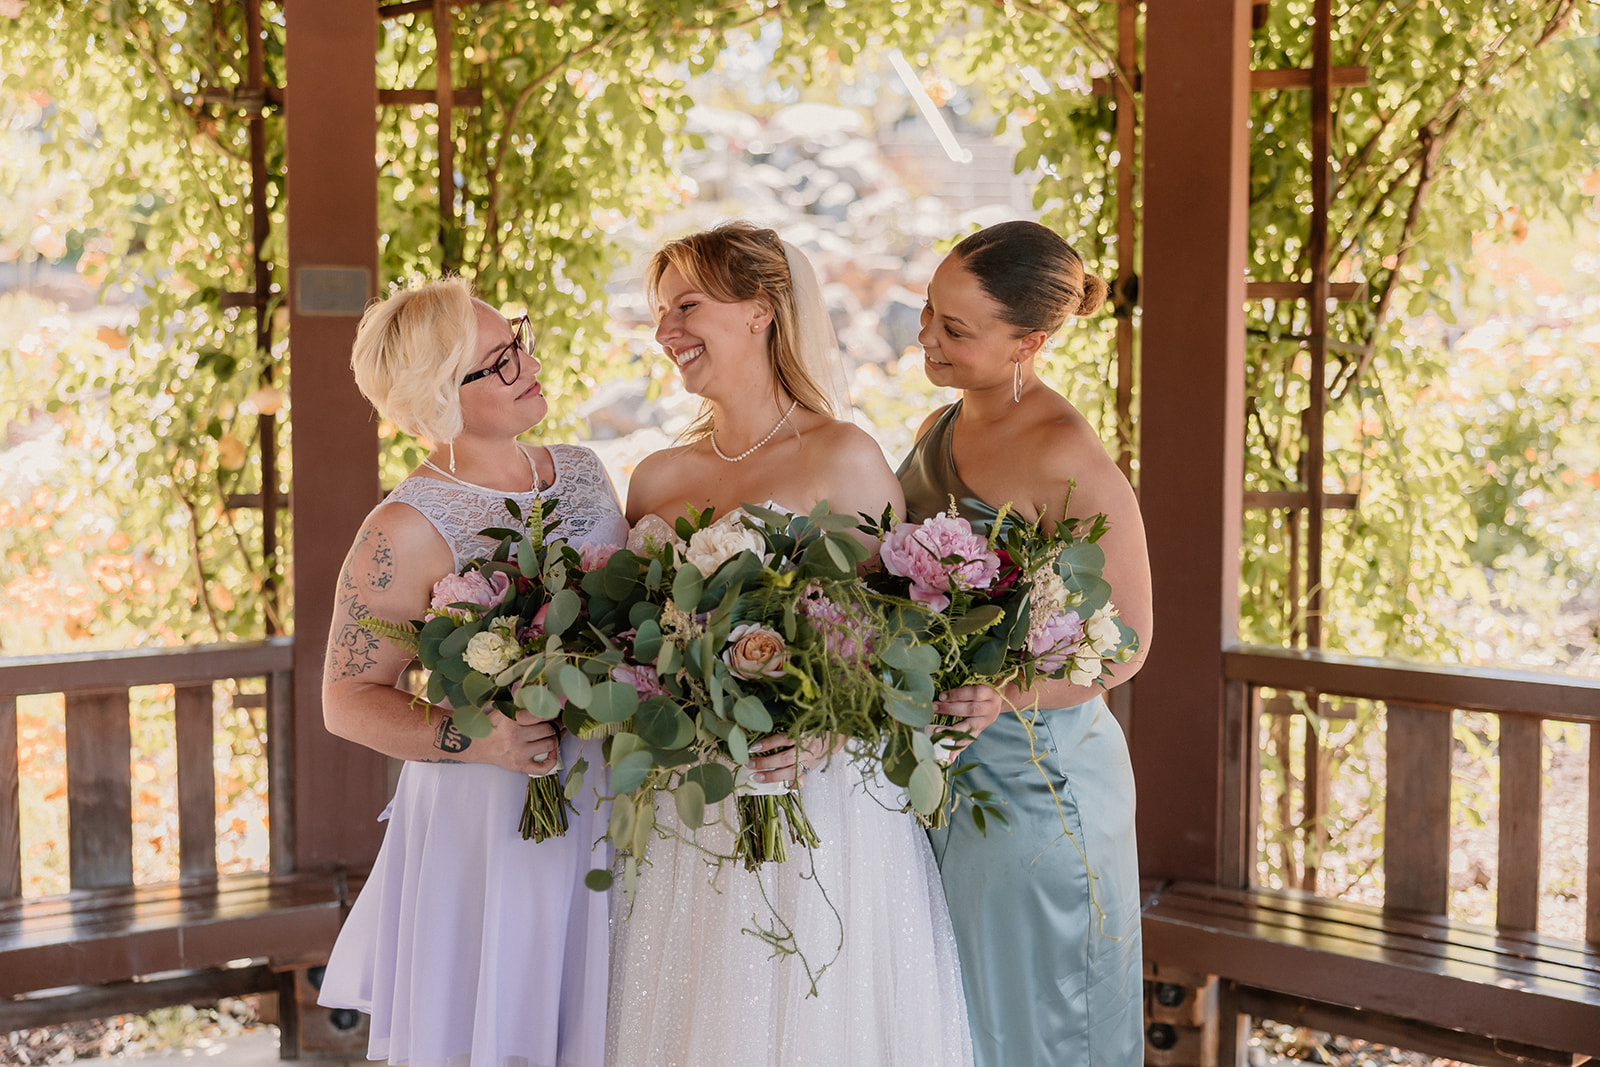 A bride and groom stand together under a gazebo, with women posing with them. The bride holds a bouquet, and all are smiling.